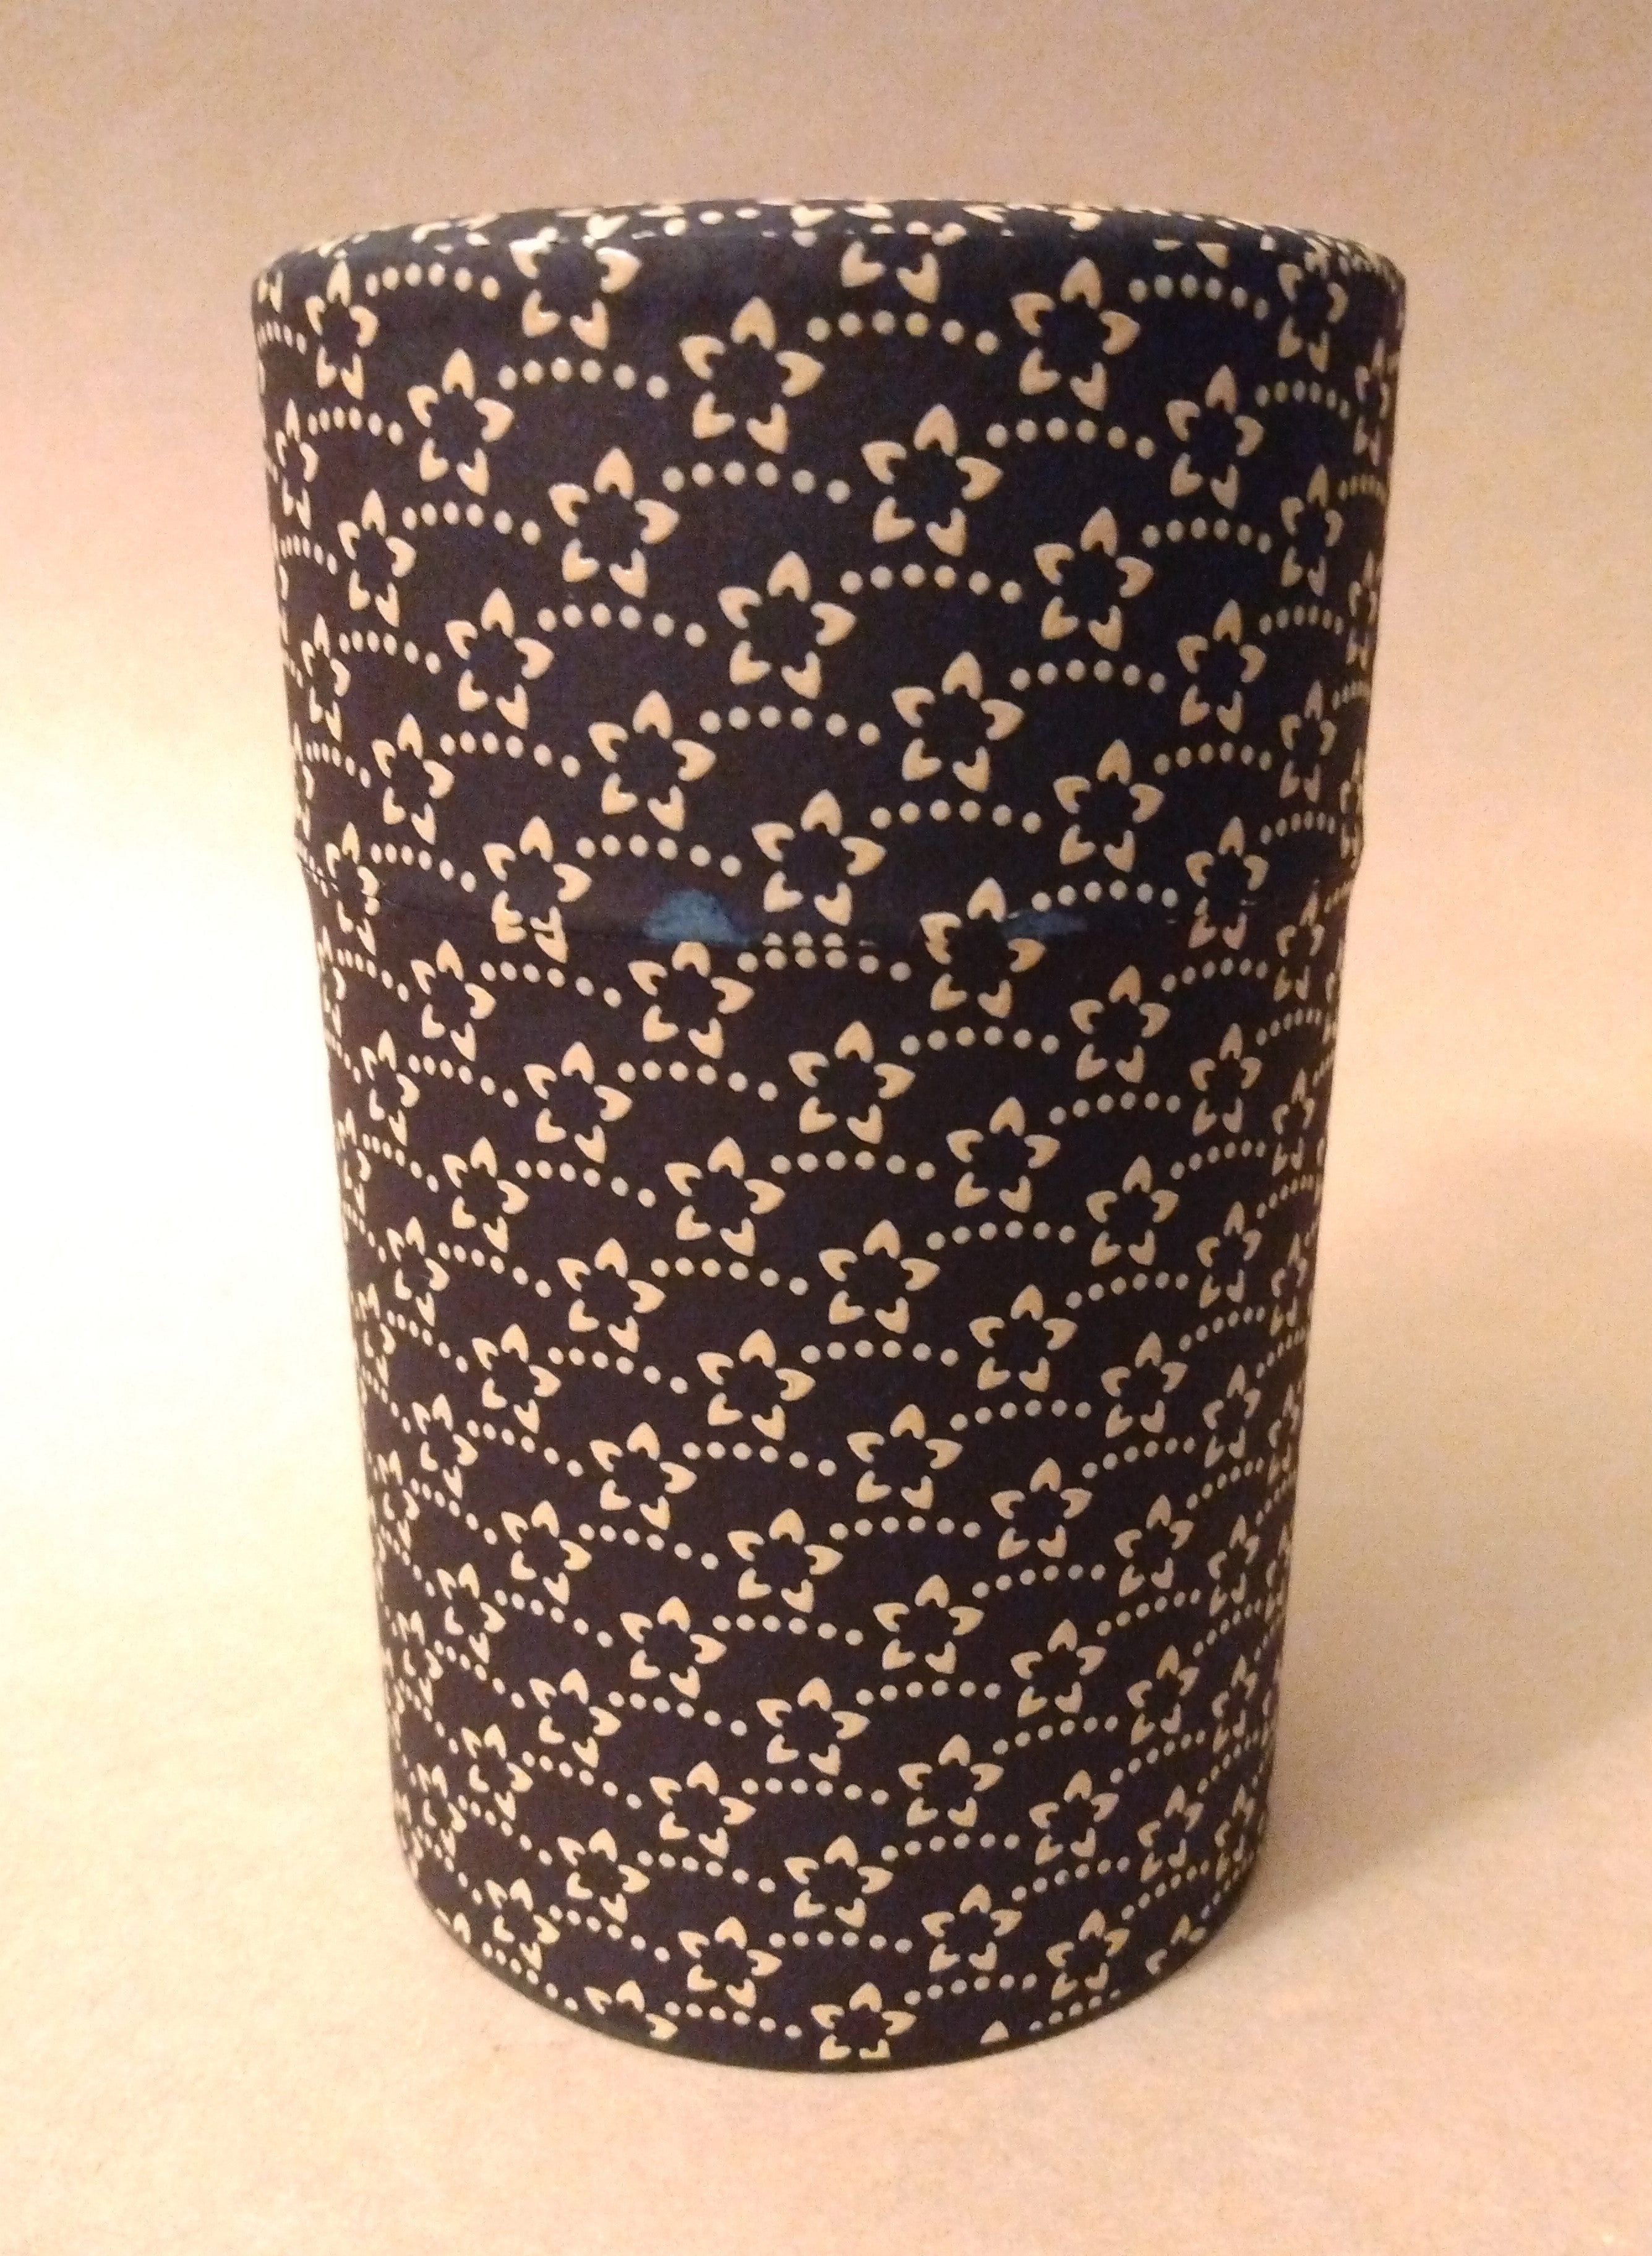 Chazutsu, Tea Canister, holds 150 gram, Stainless Steel covered in Blue or Red Washi Paper